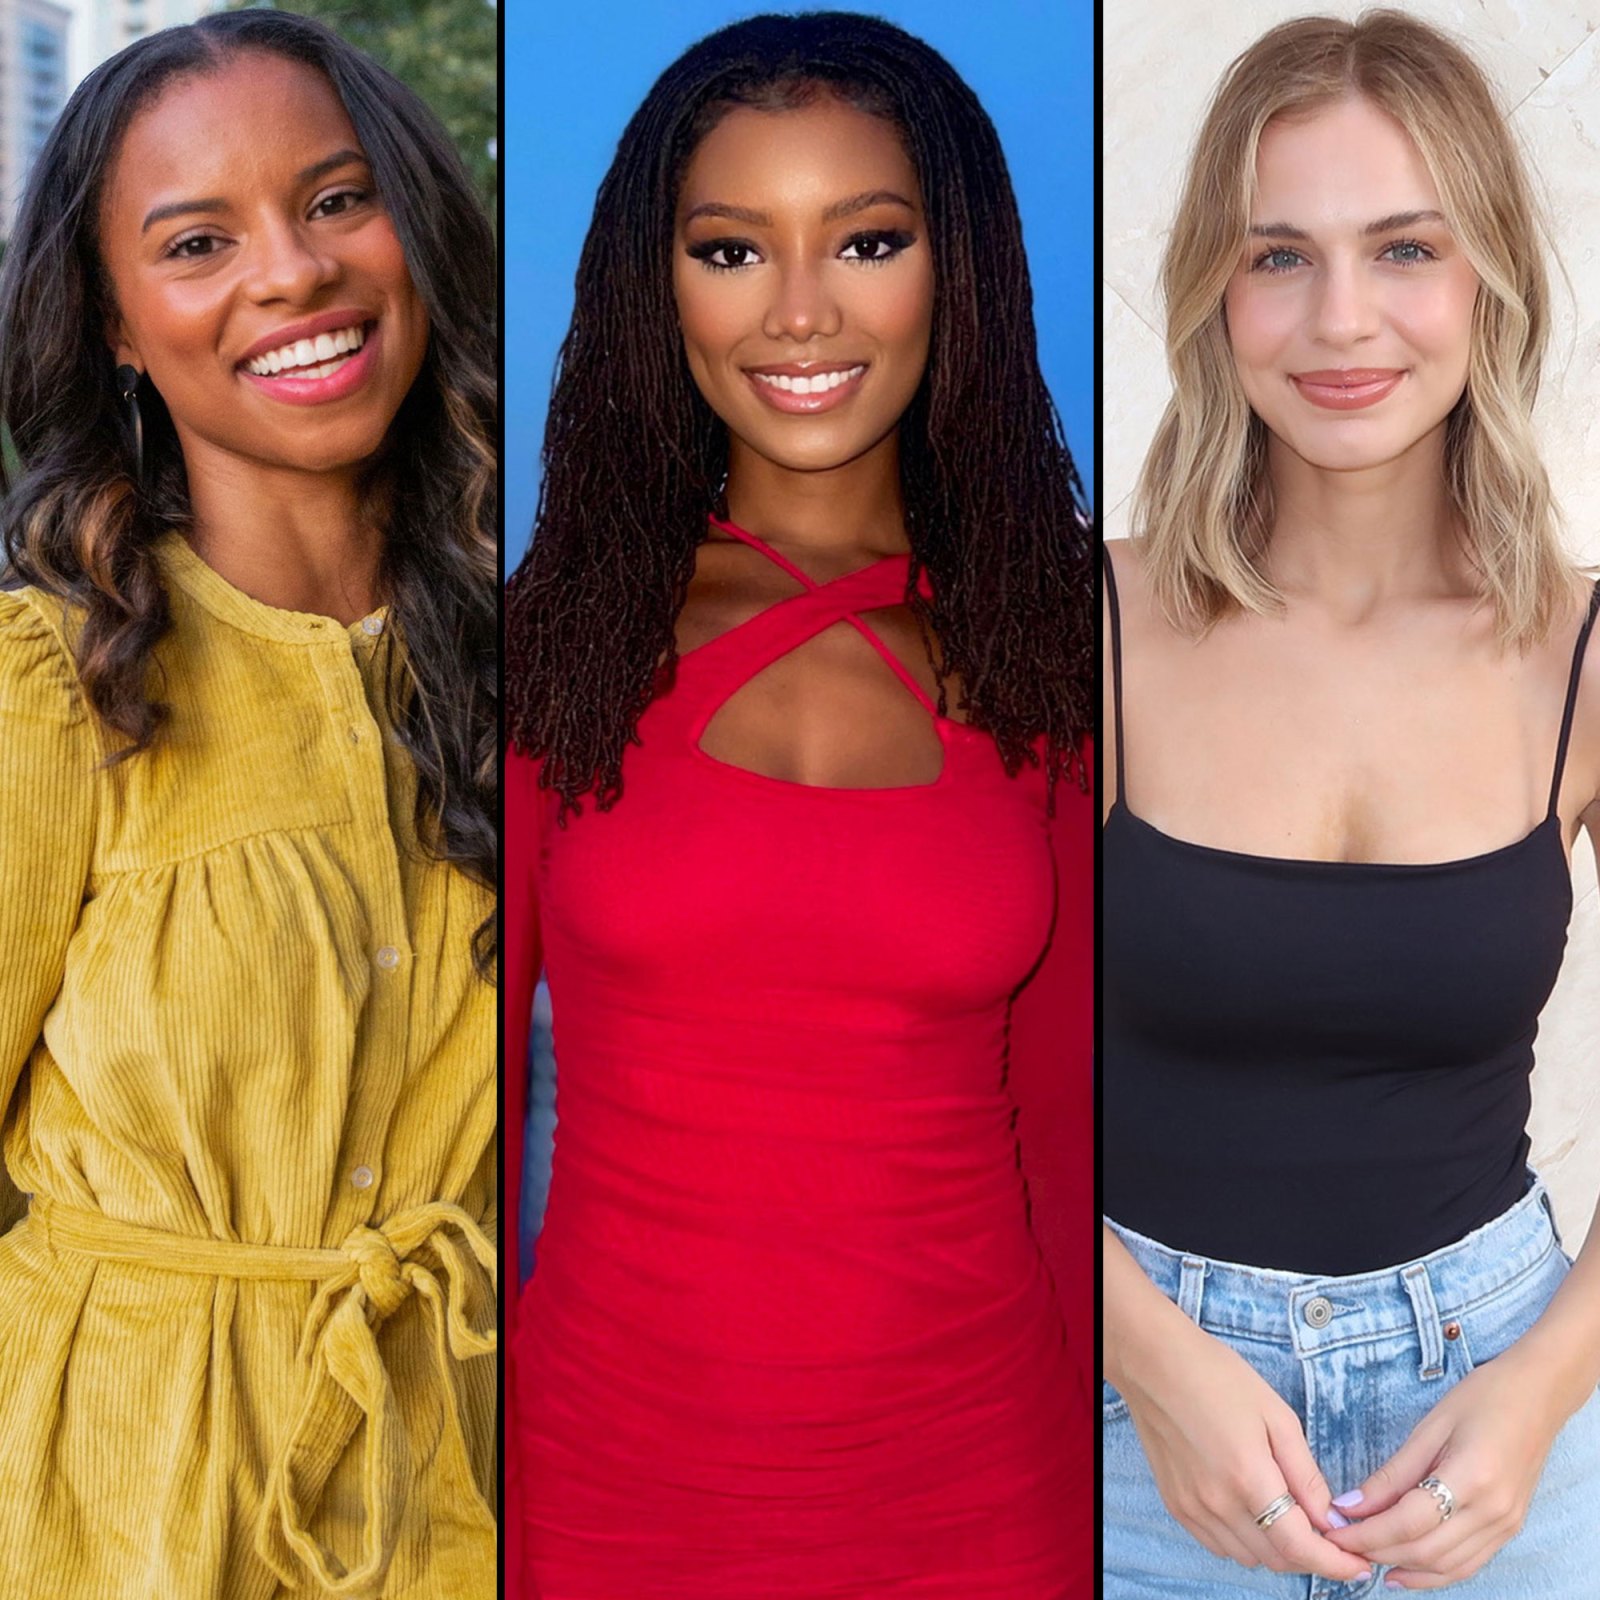 32 Contestants Who Might Be on ‘The Bachelor’